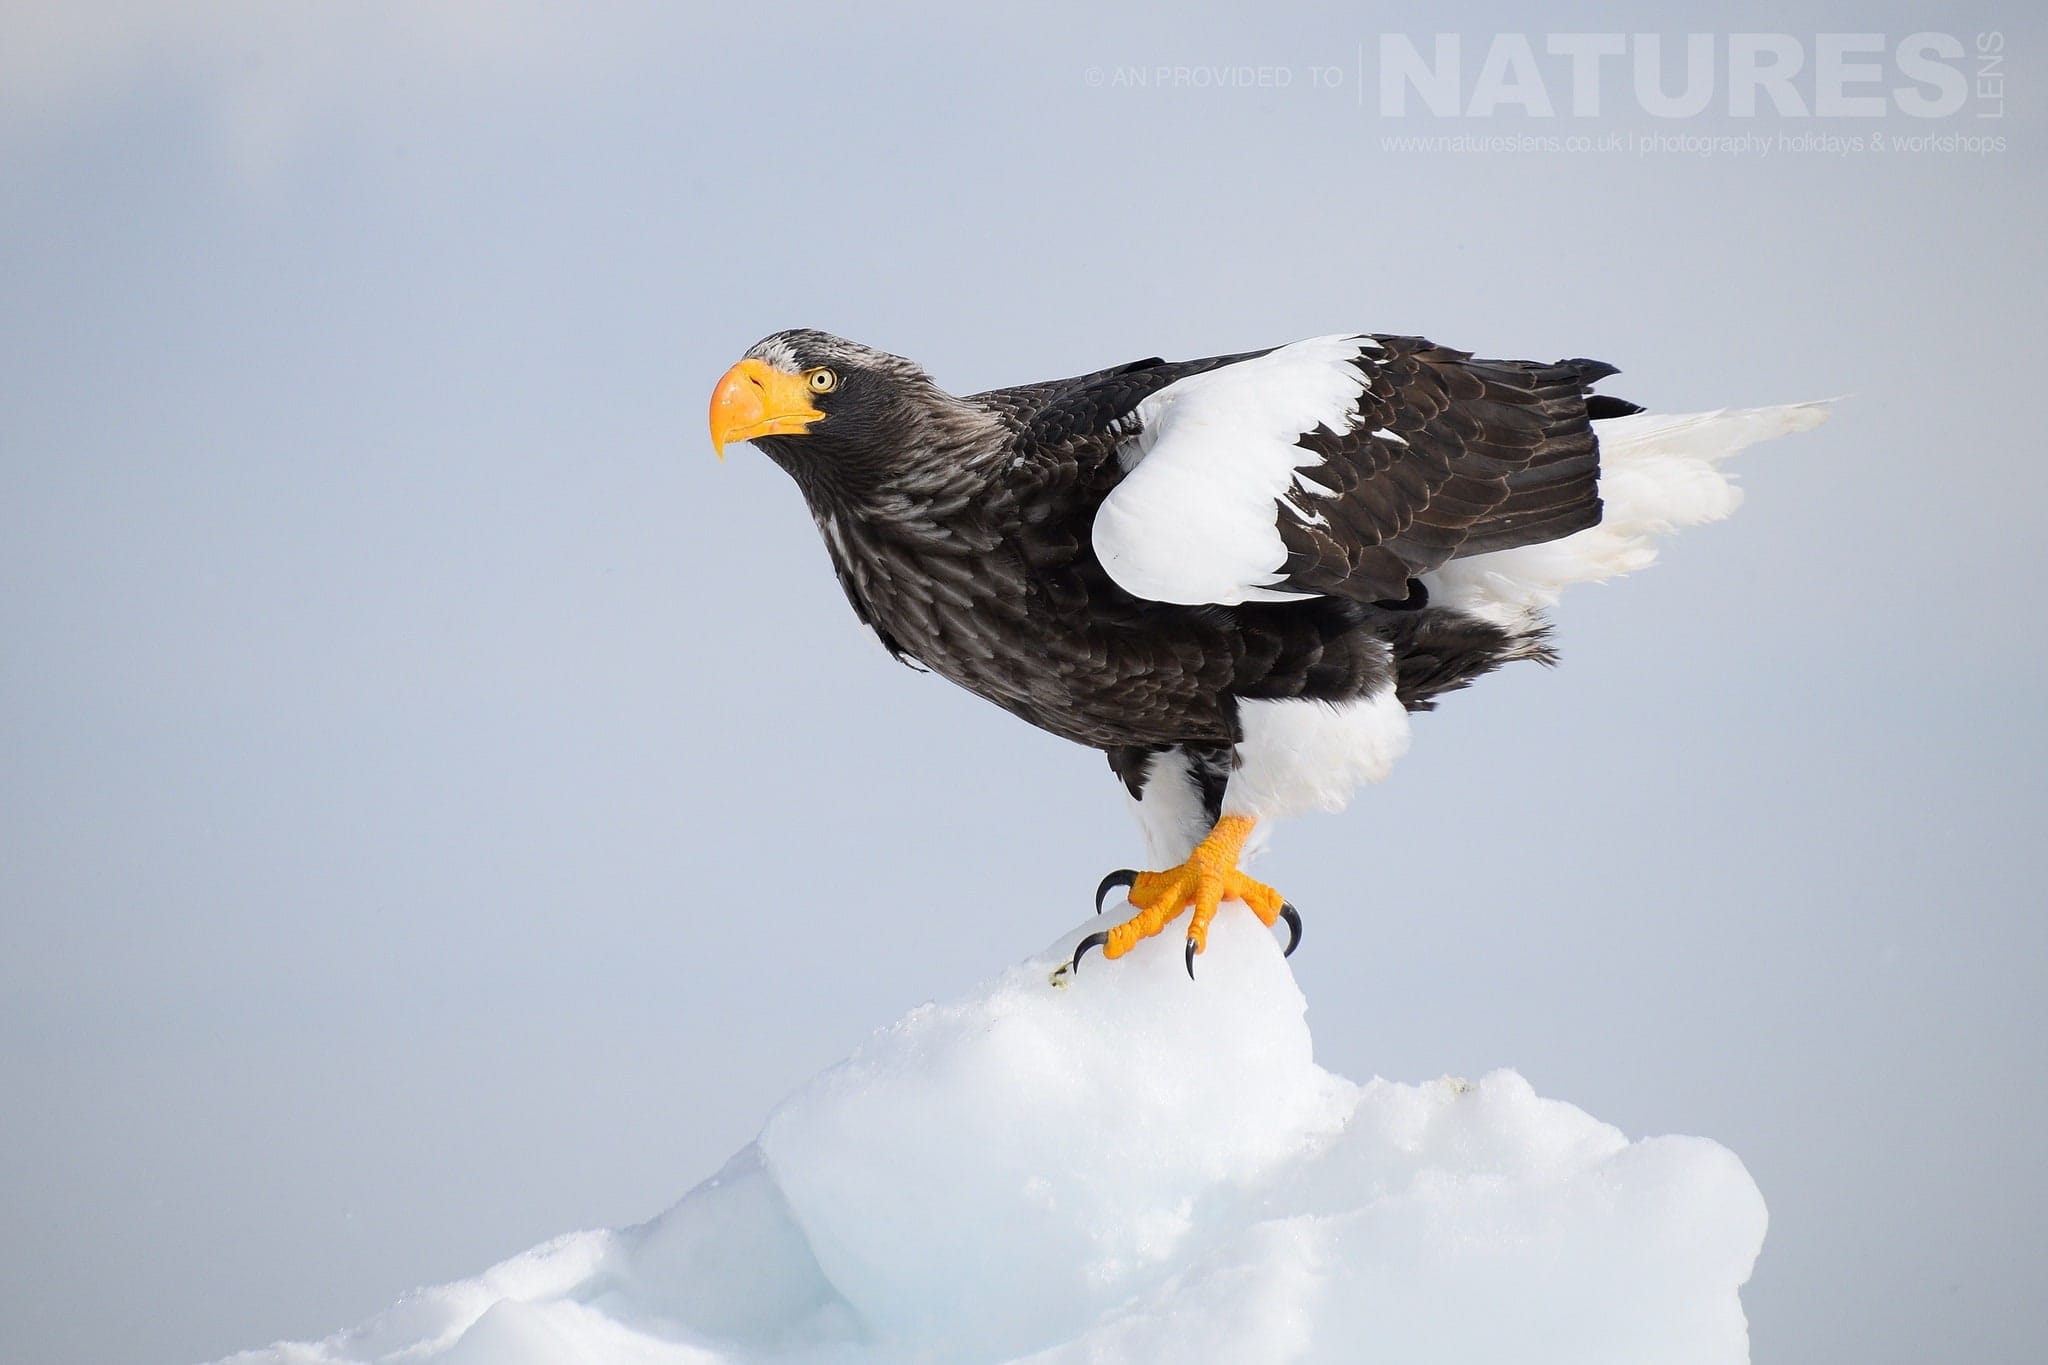 An exceptionally beautiful Stellers sea eagle poses on a outcrop of frozen pack ice located on the coast of Rausu captured NaturesLens during the Winter Wildlife of Japan Photography Holiday